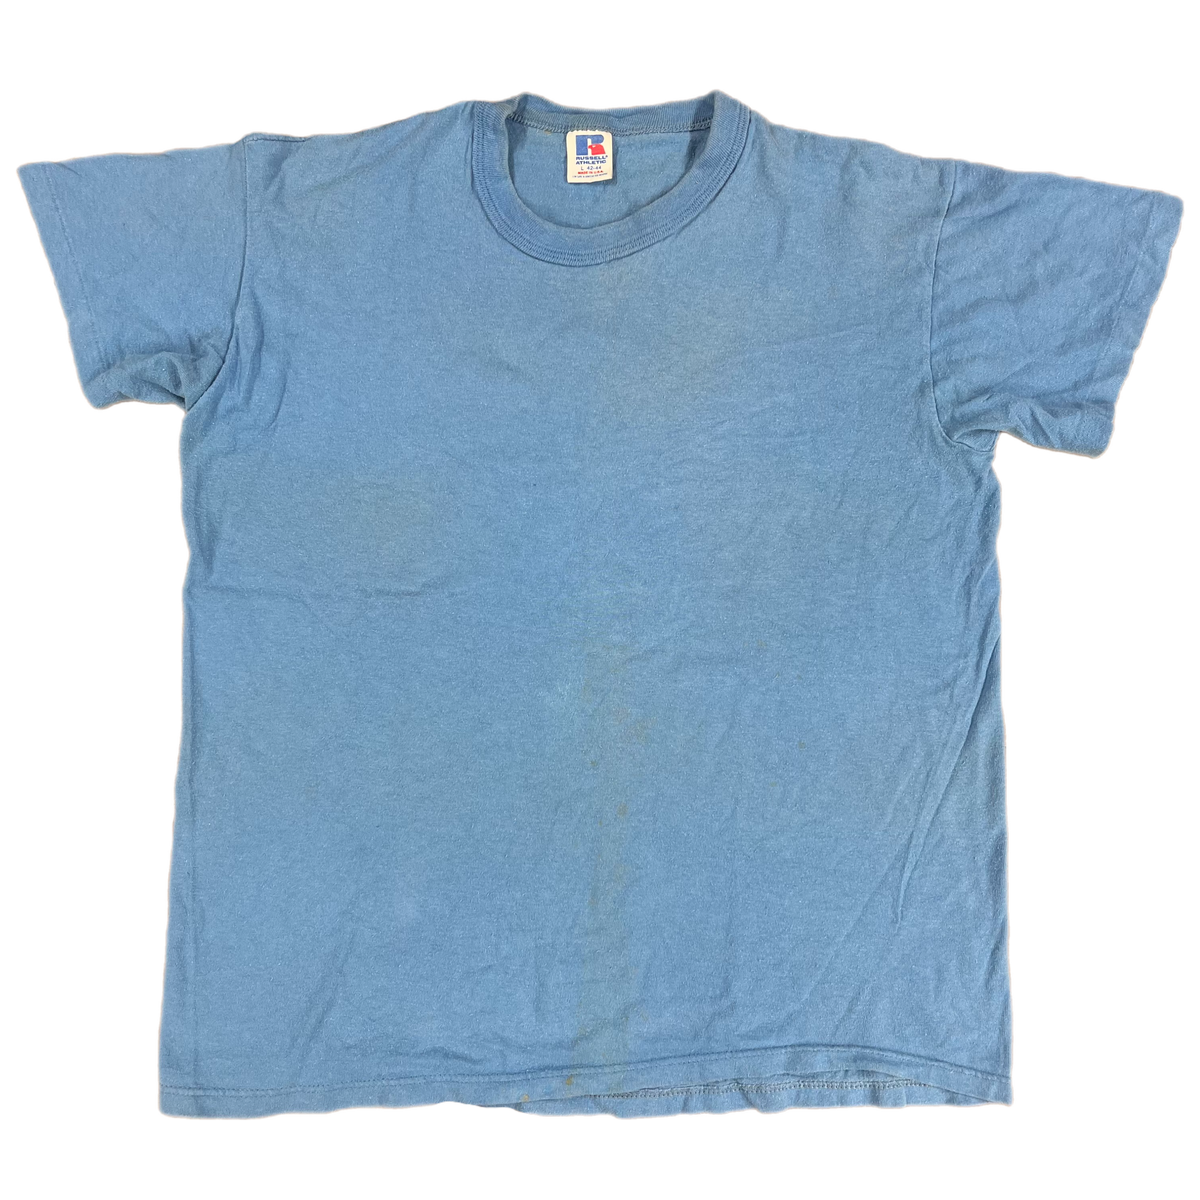 Vintage Russell Athletic Baby Blue T-Shirt